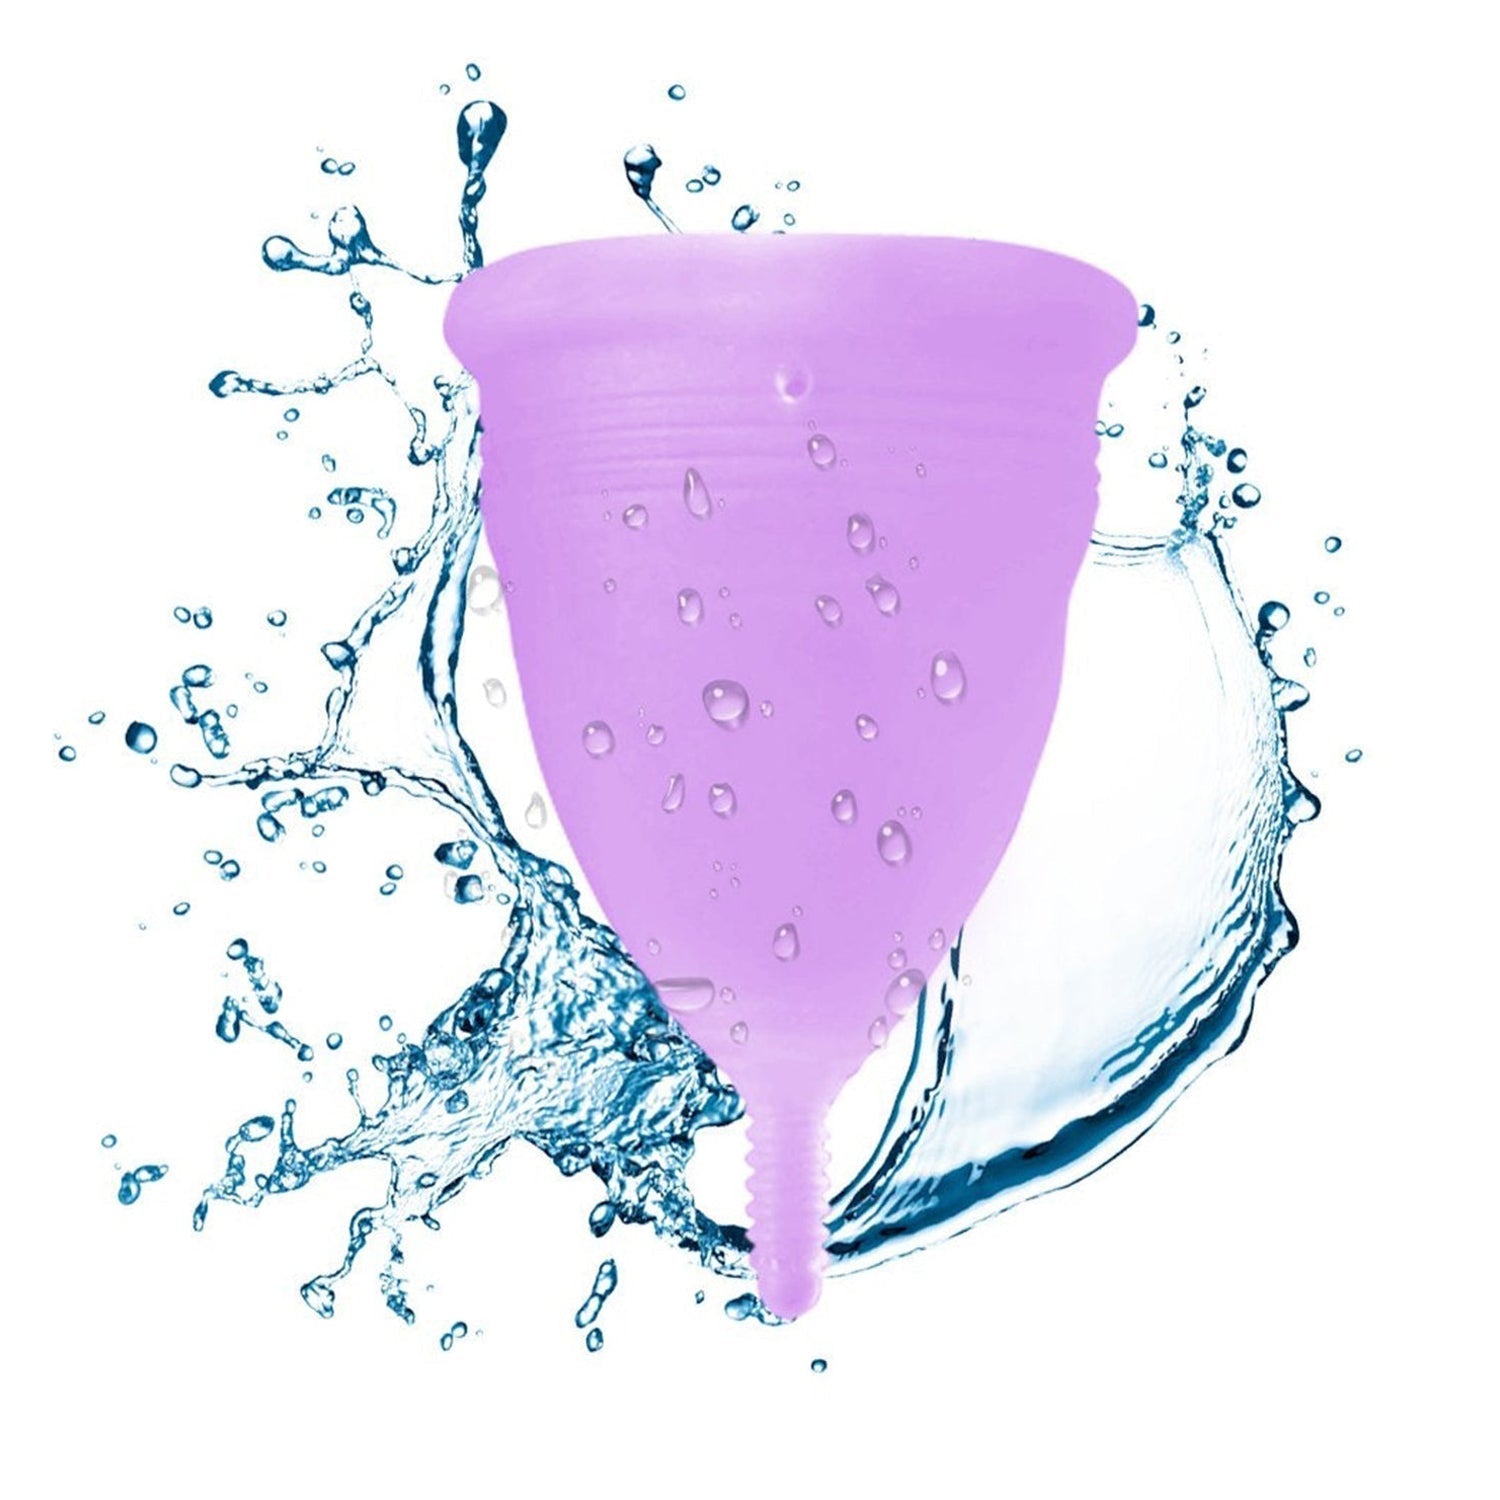 6112A Reusable Menstrual Cup used by womens and girls during the time of their menstrual cycle freeshipping - DeoDap